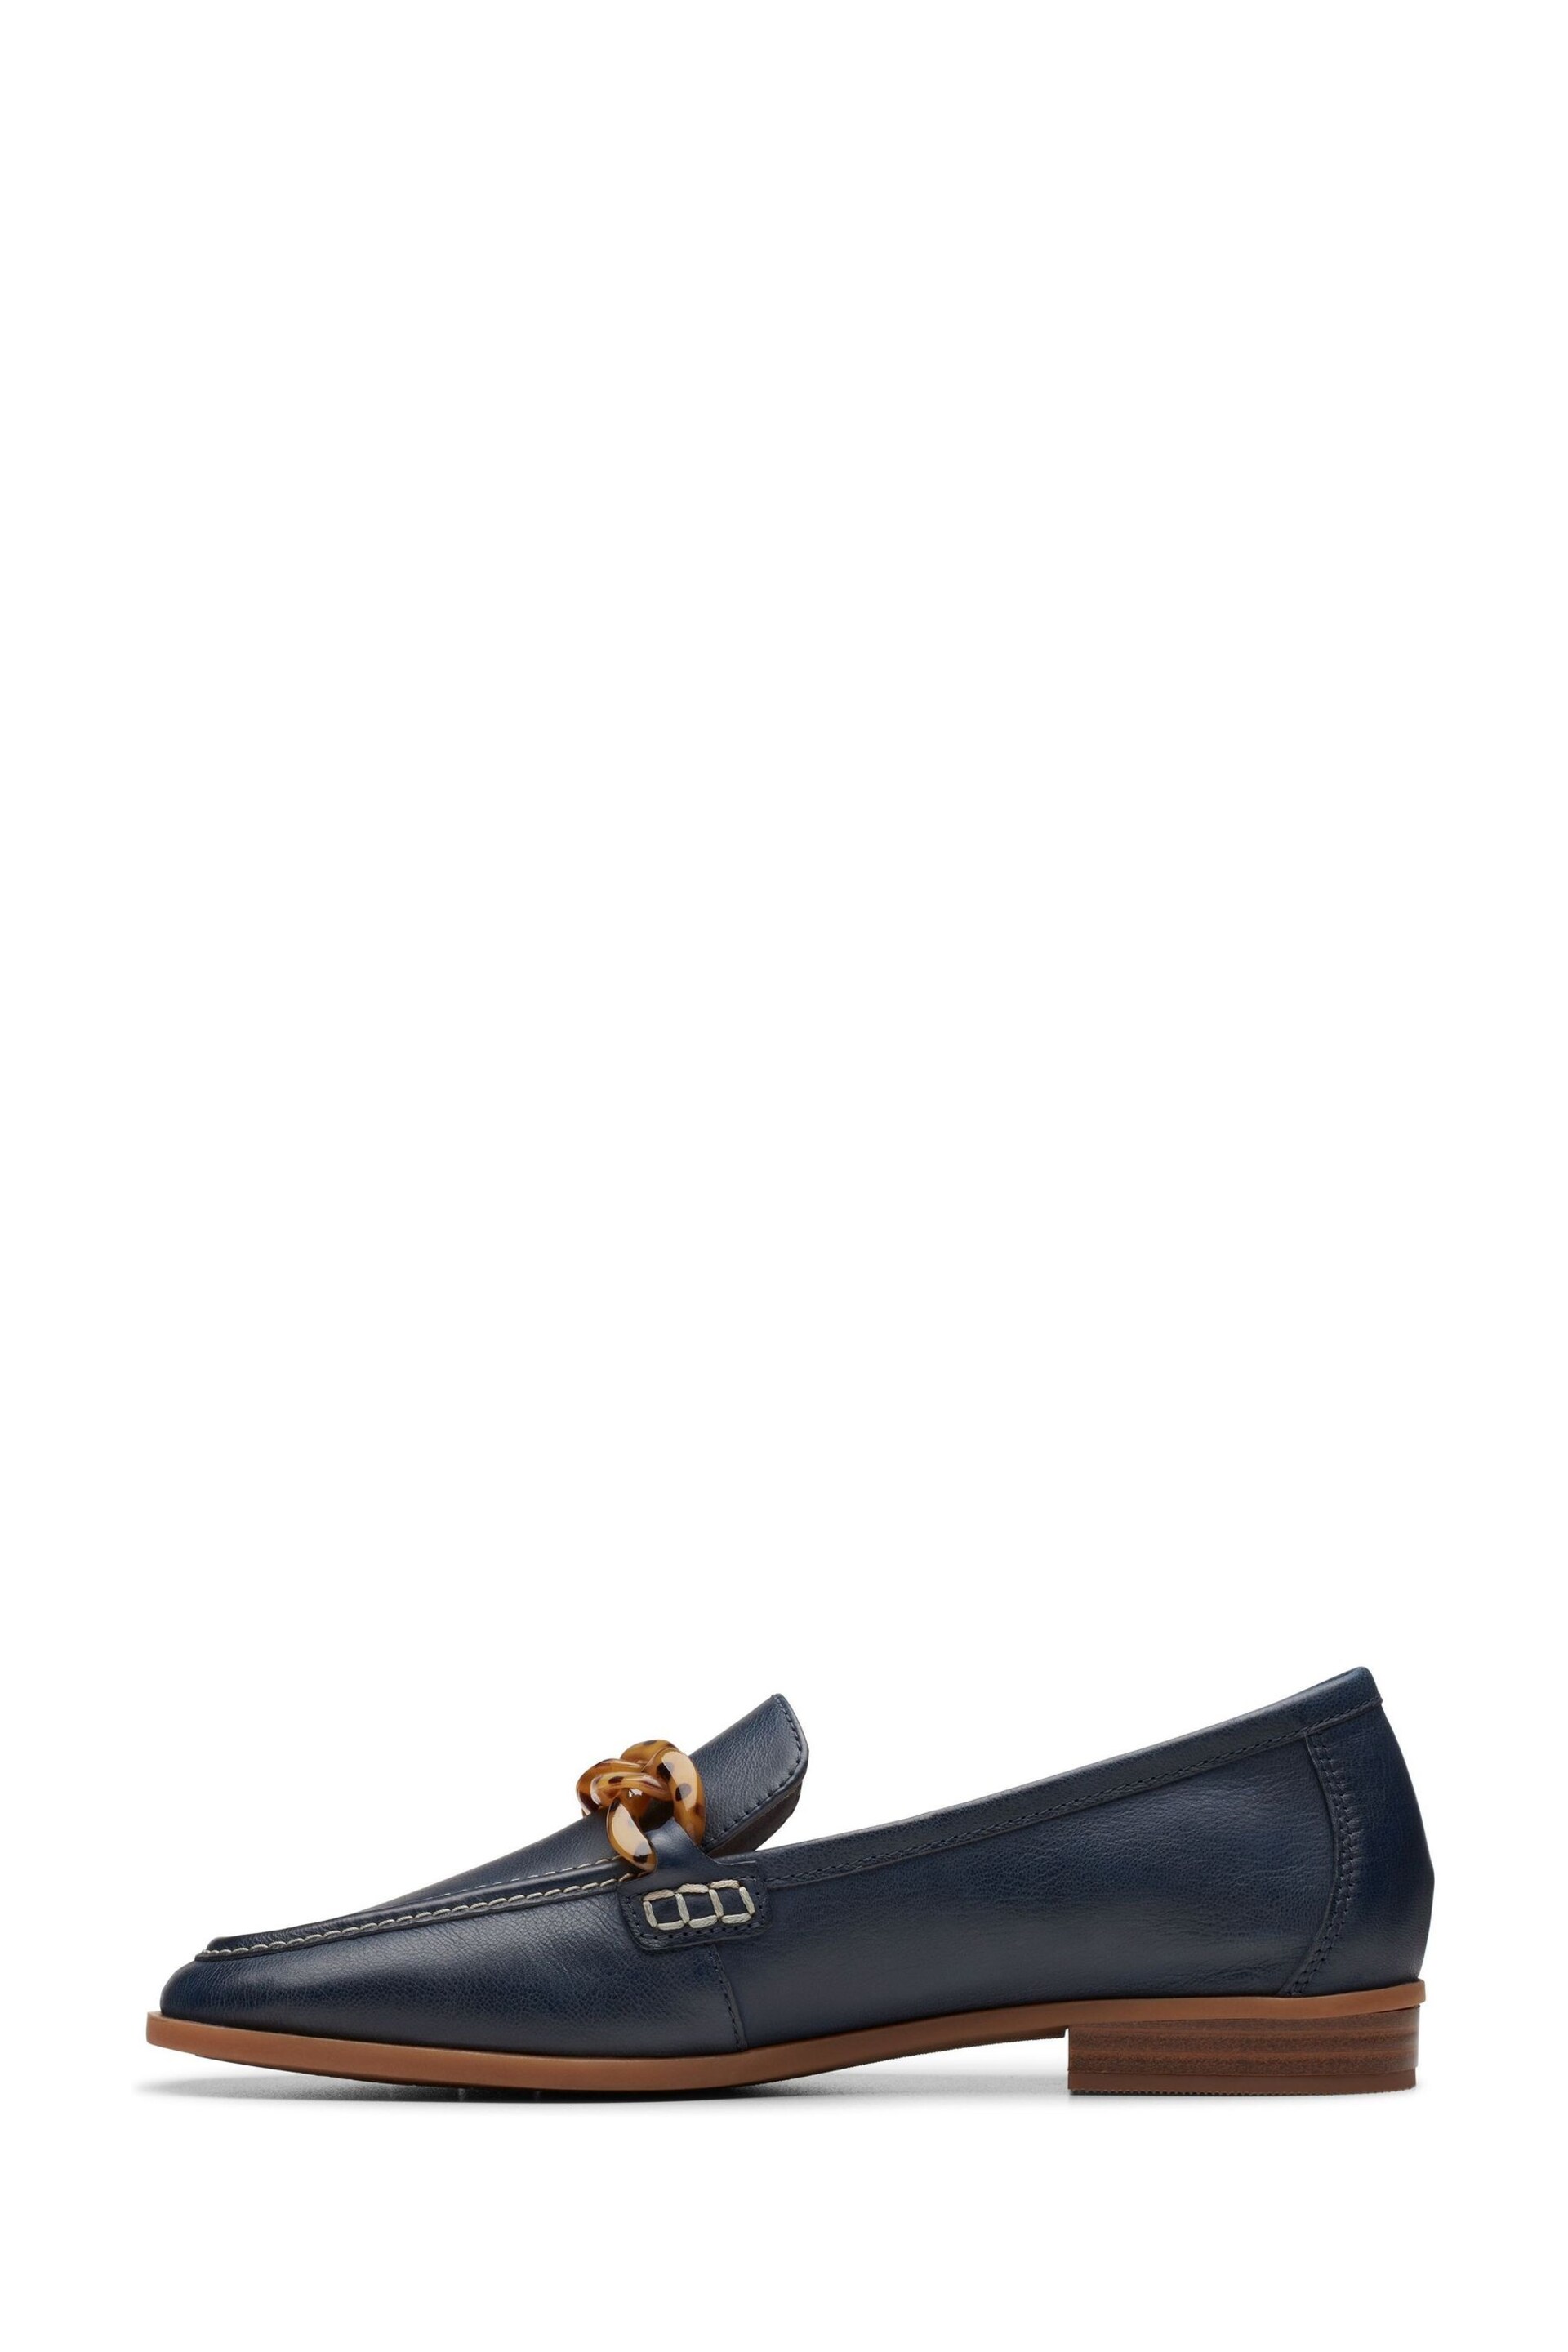 Clarks Blue Leather Sarafyna Iris Shoes - Image 2 of 8